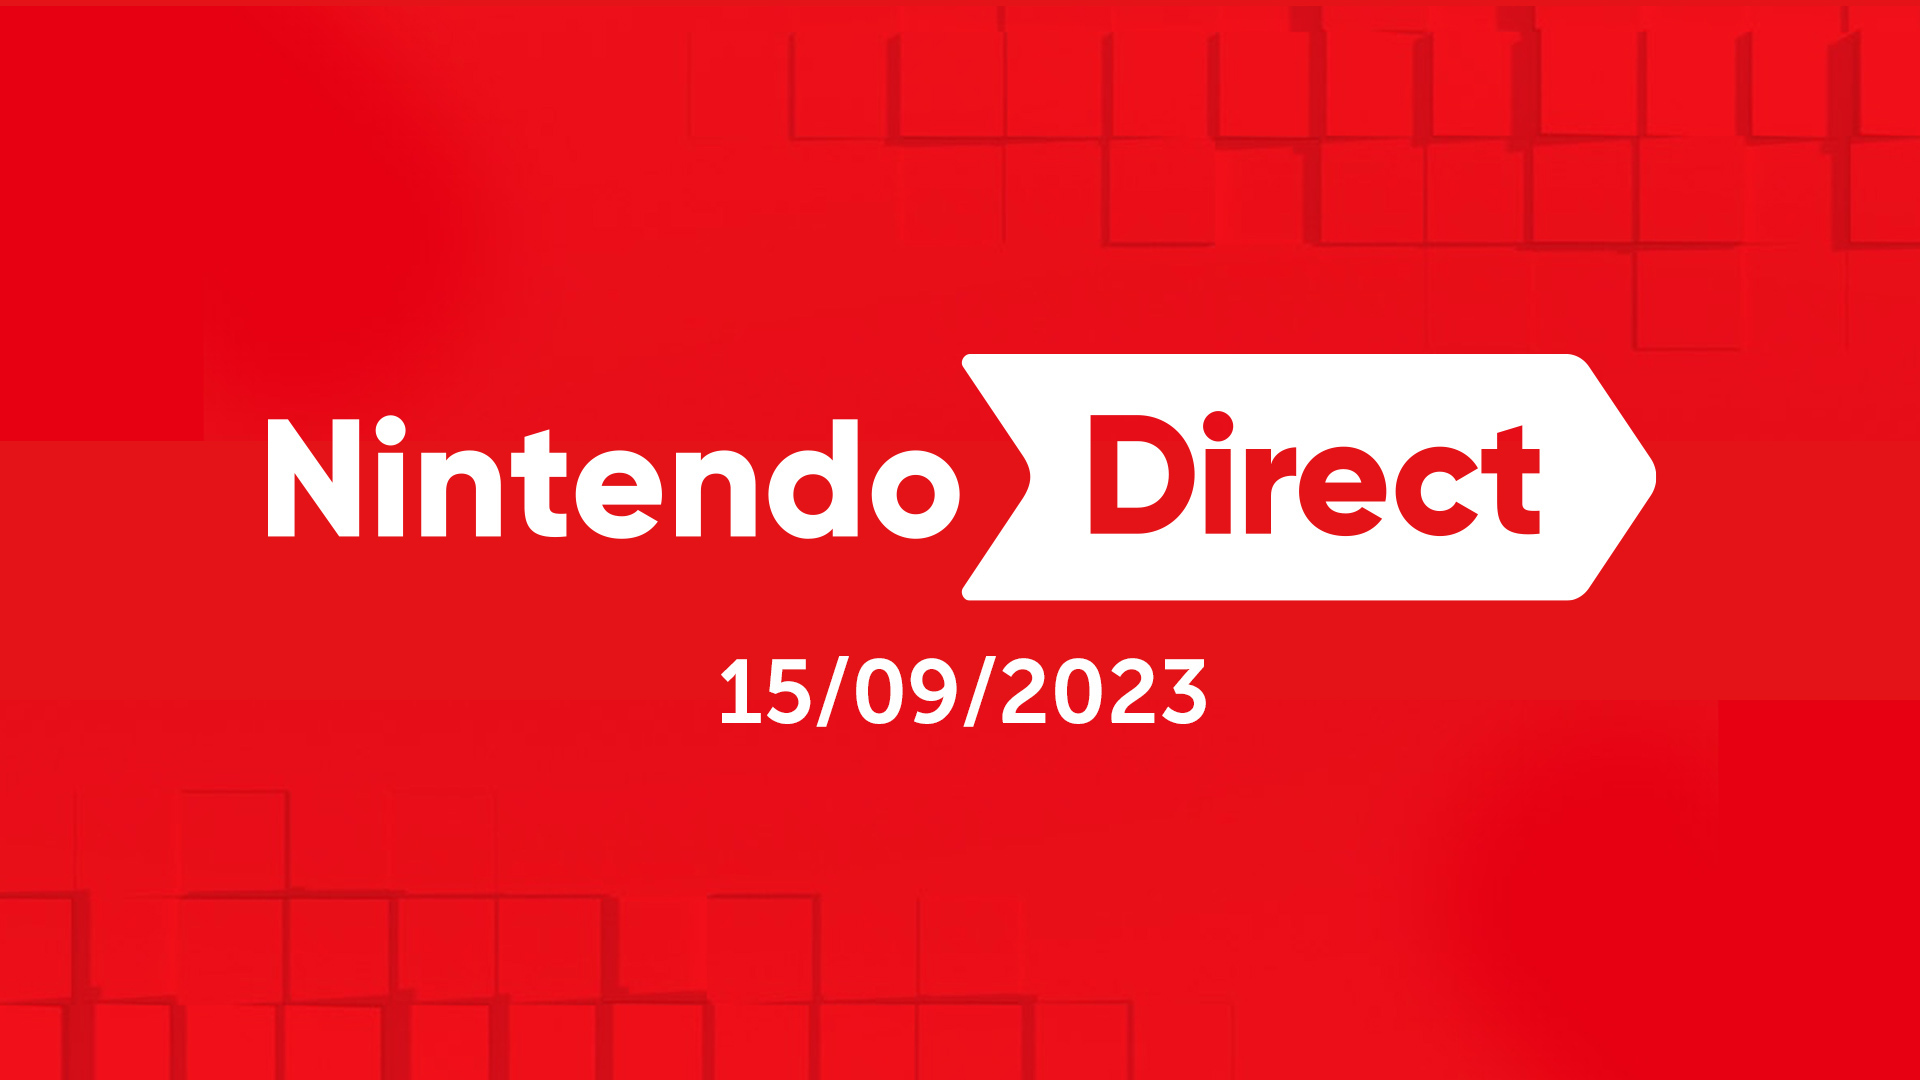 A graphic with a red background and white font, promoting the Nintendo Direct on 15/09/2023.